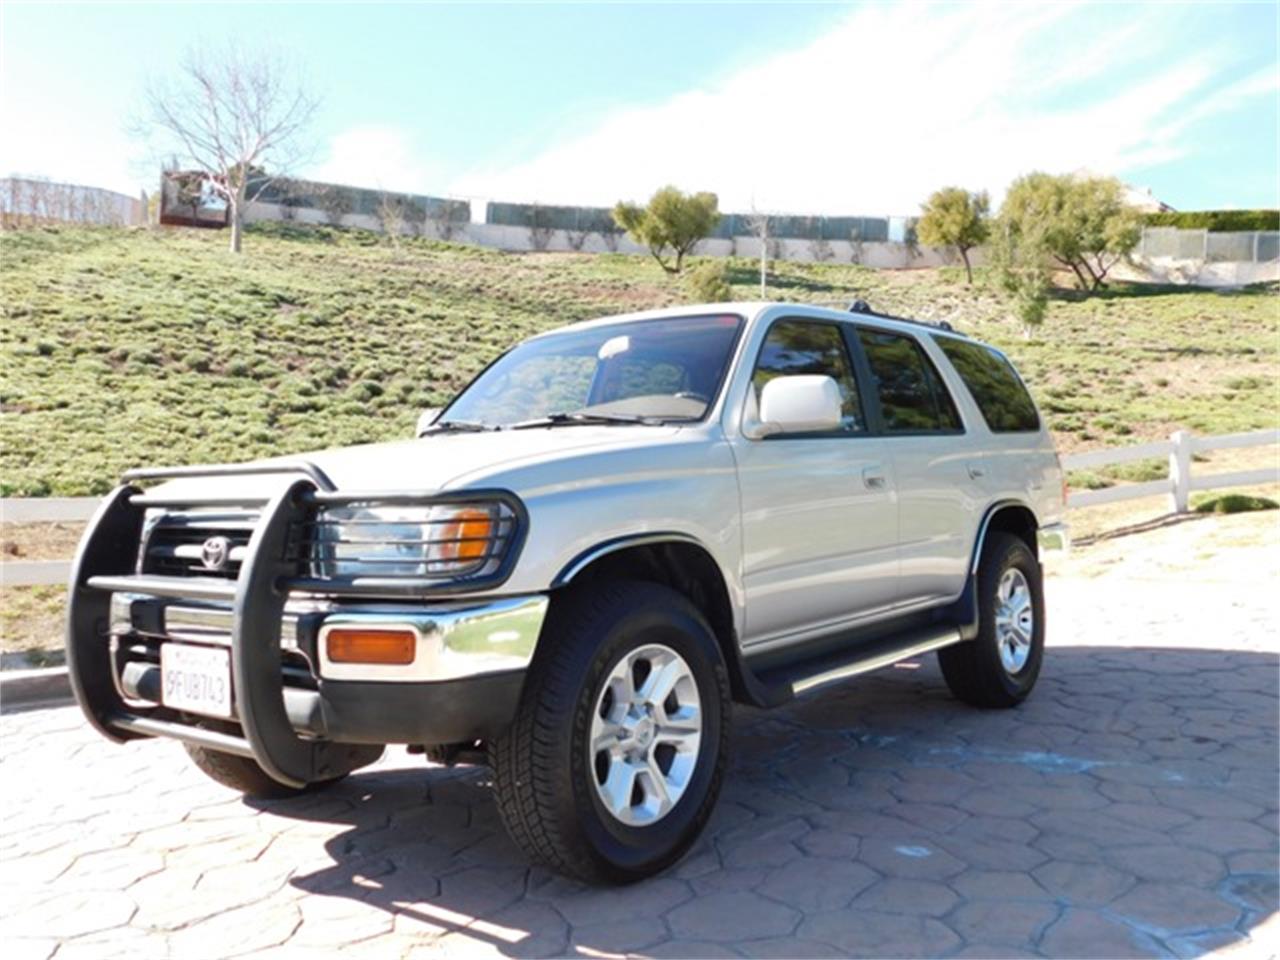 For Sale at Auction: 1997 Toyota 4Runner in Palm Springs, California for sale in Palm Springs, CA